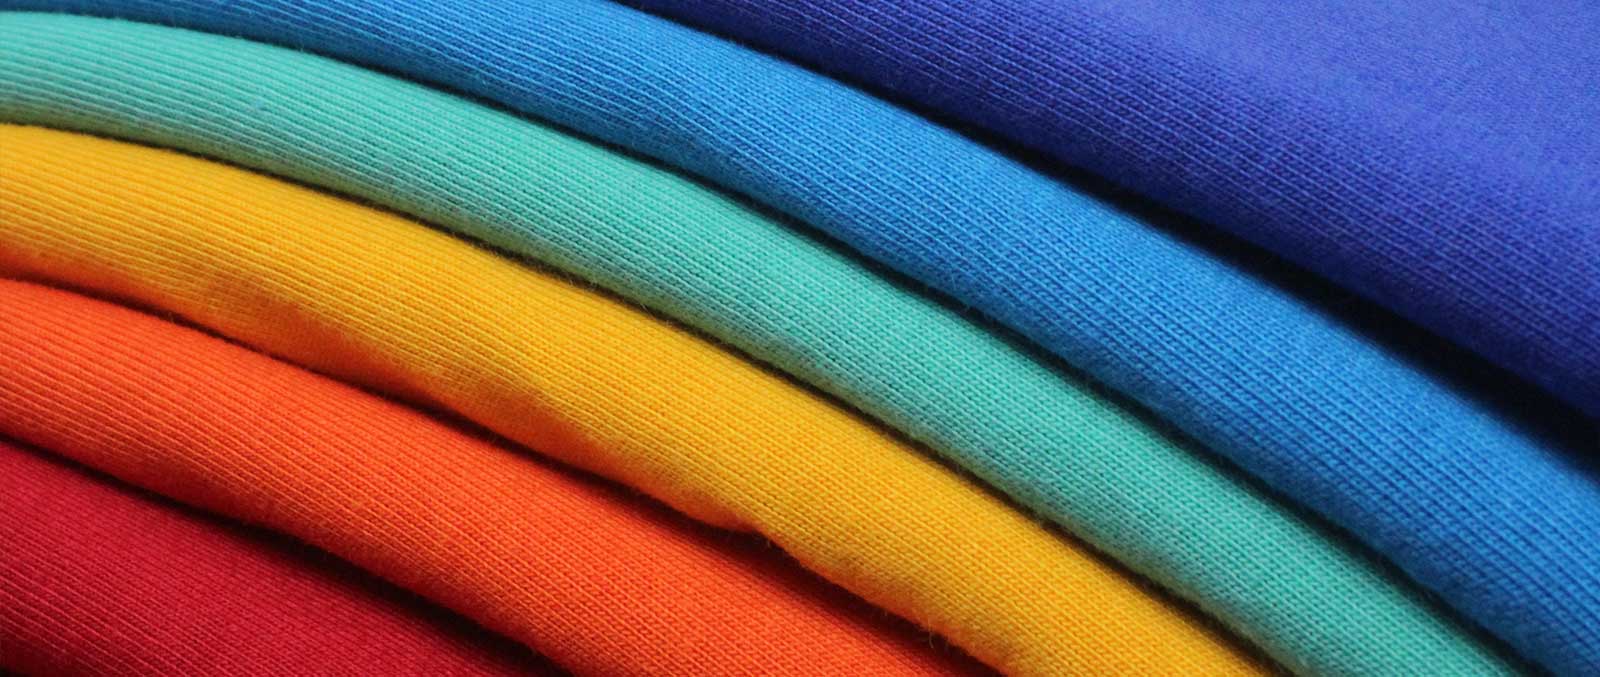 Is Polyester Stretchy? A Guide to Polyester Clothing